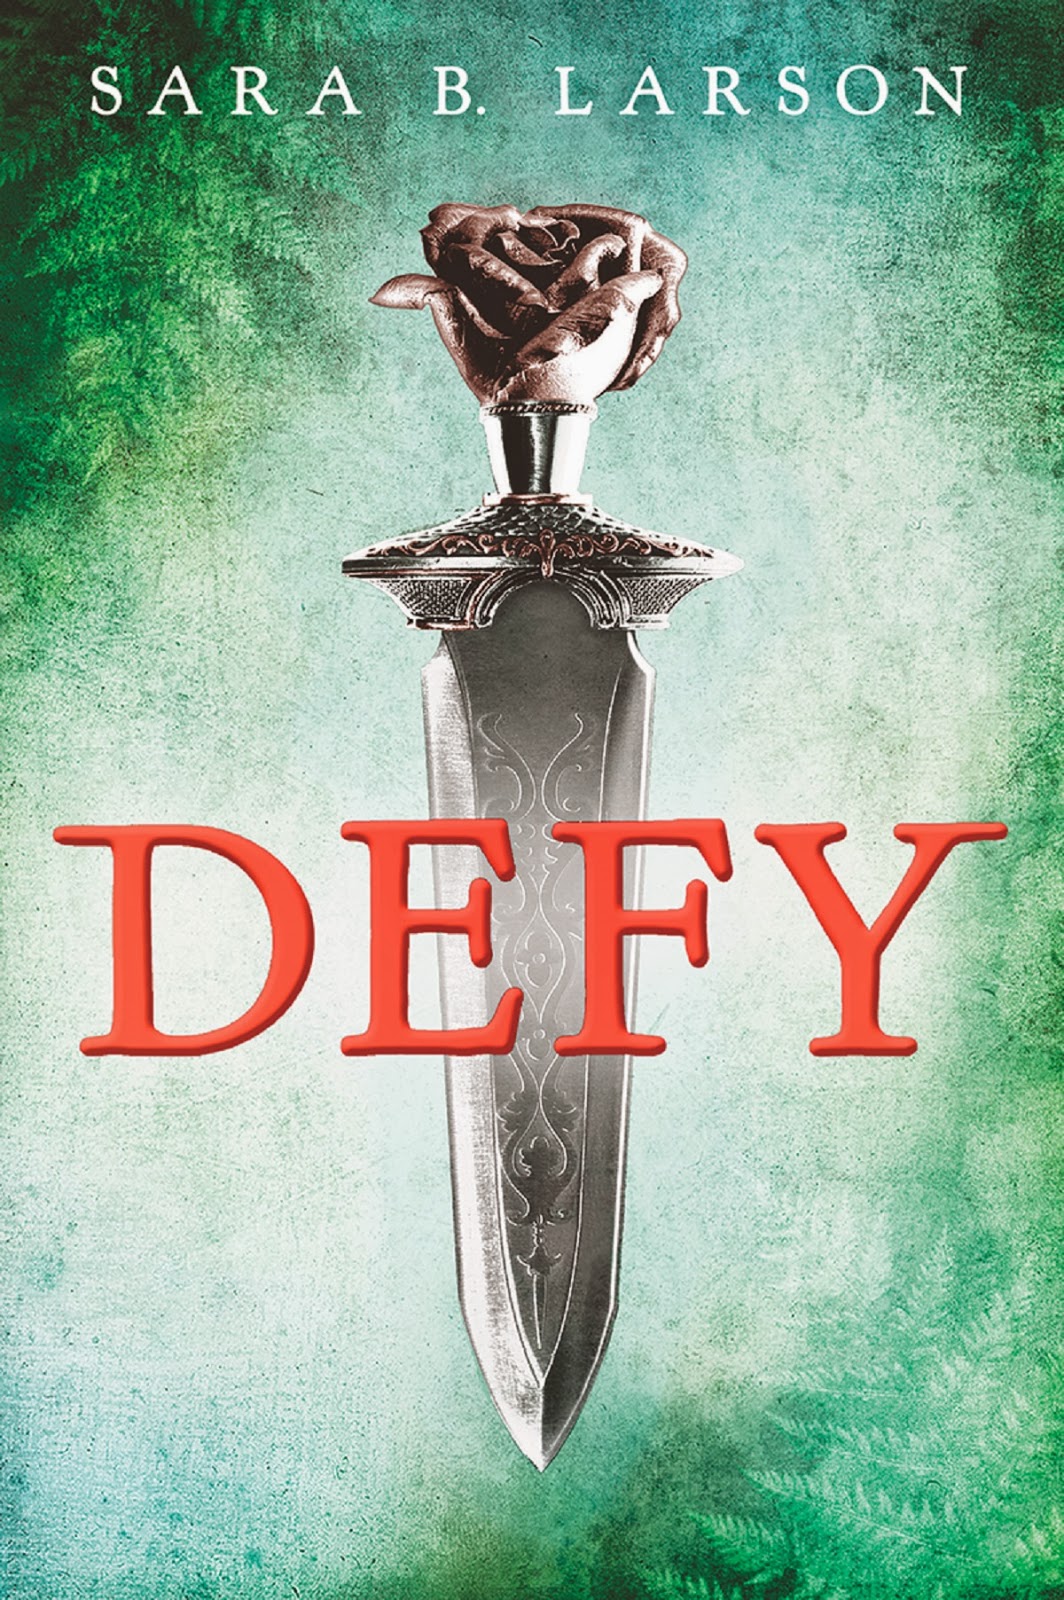 defy the night book 2 release date